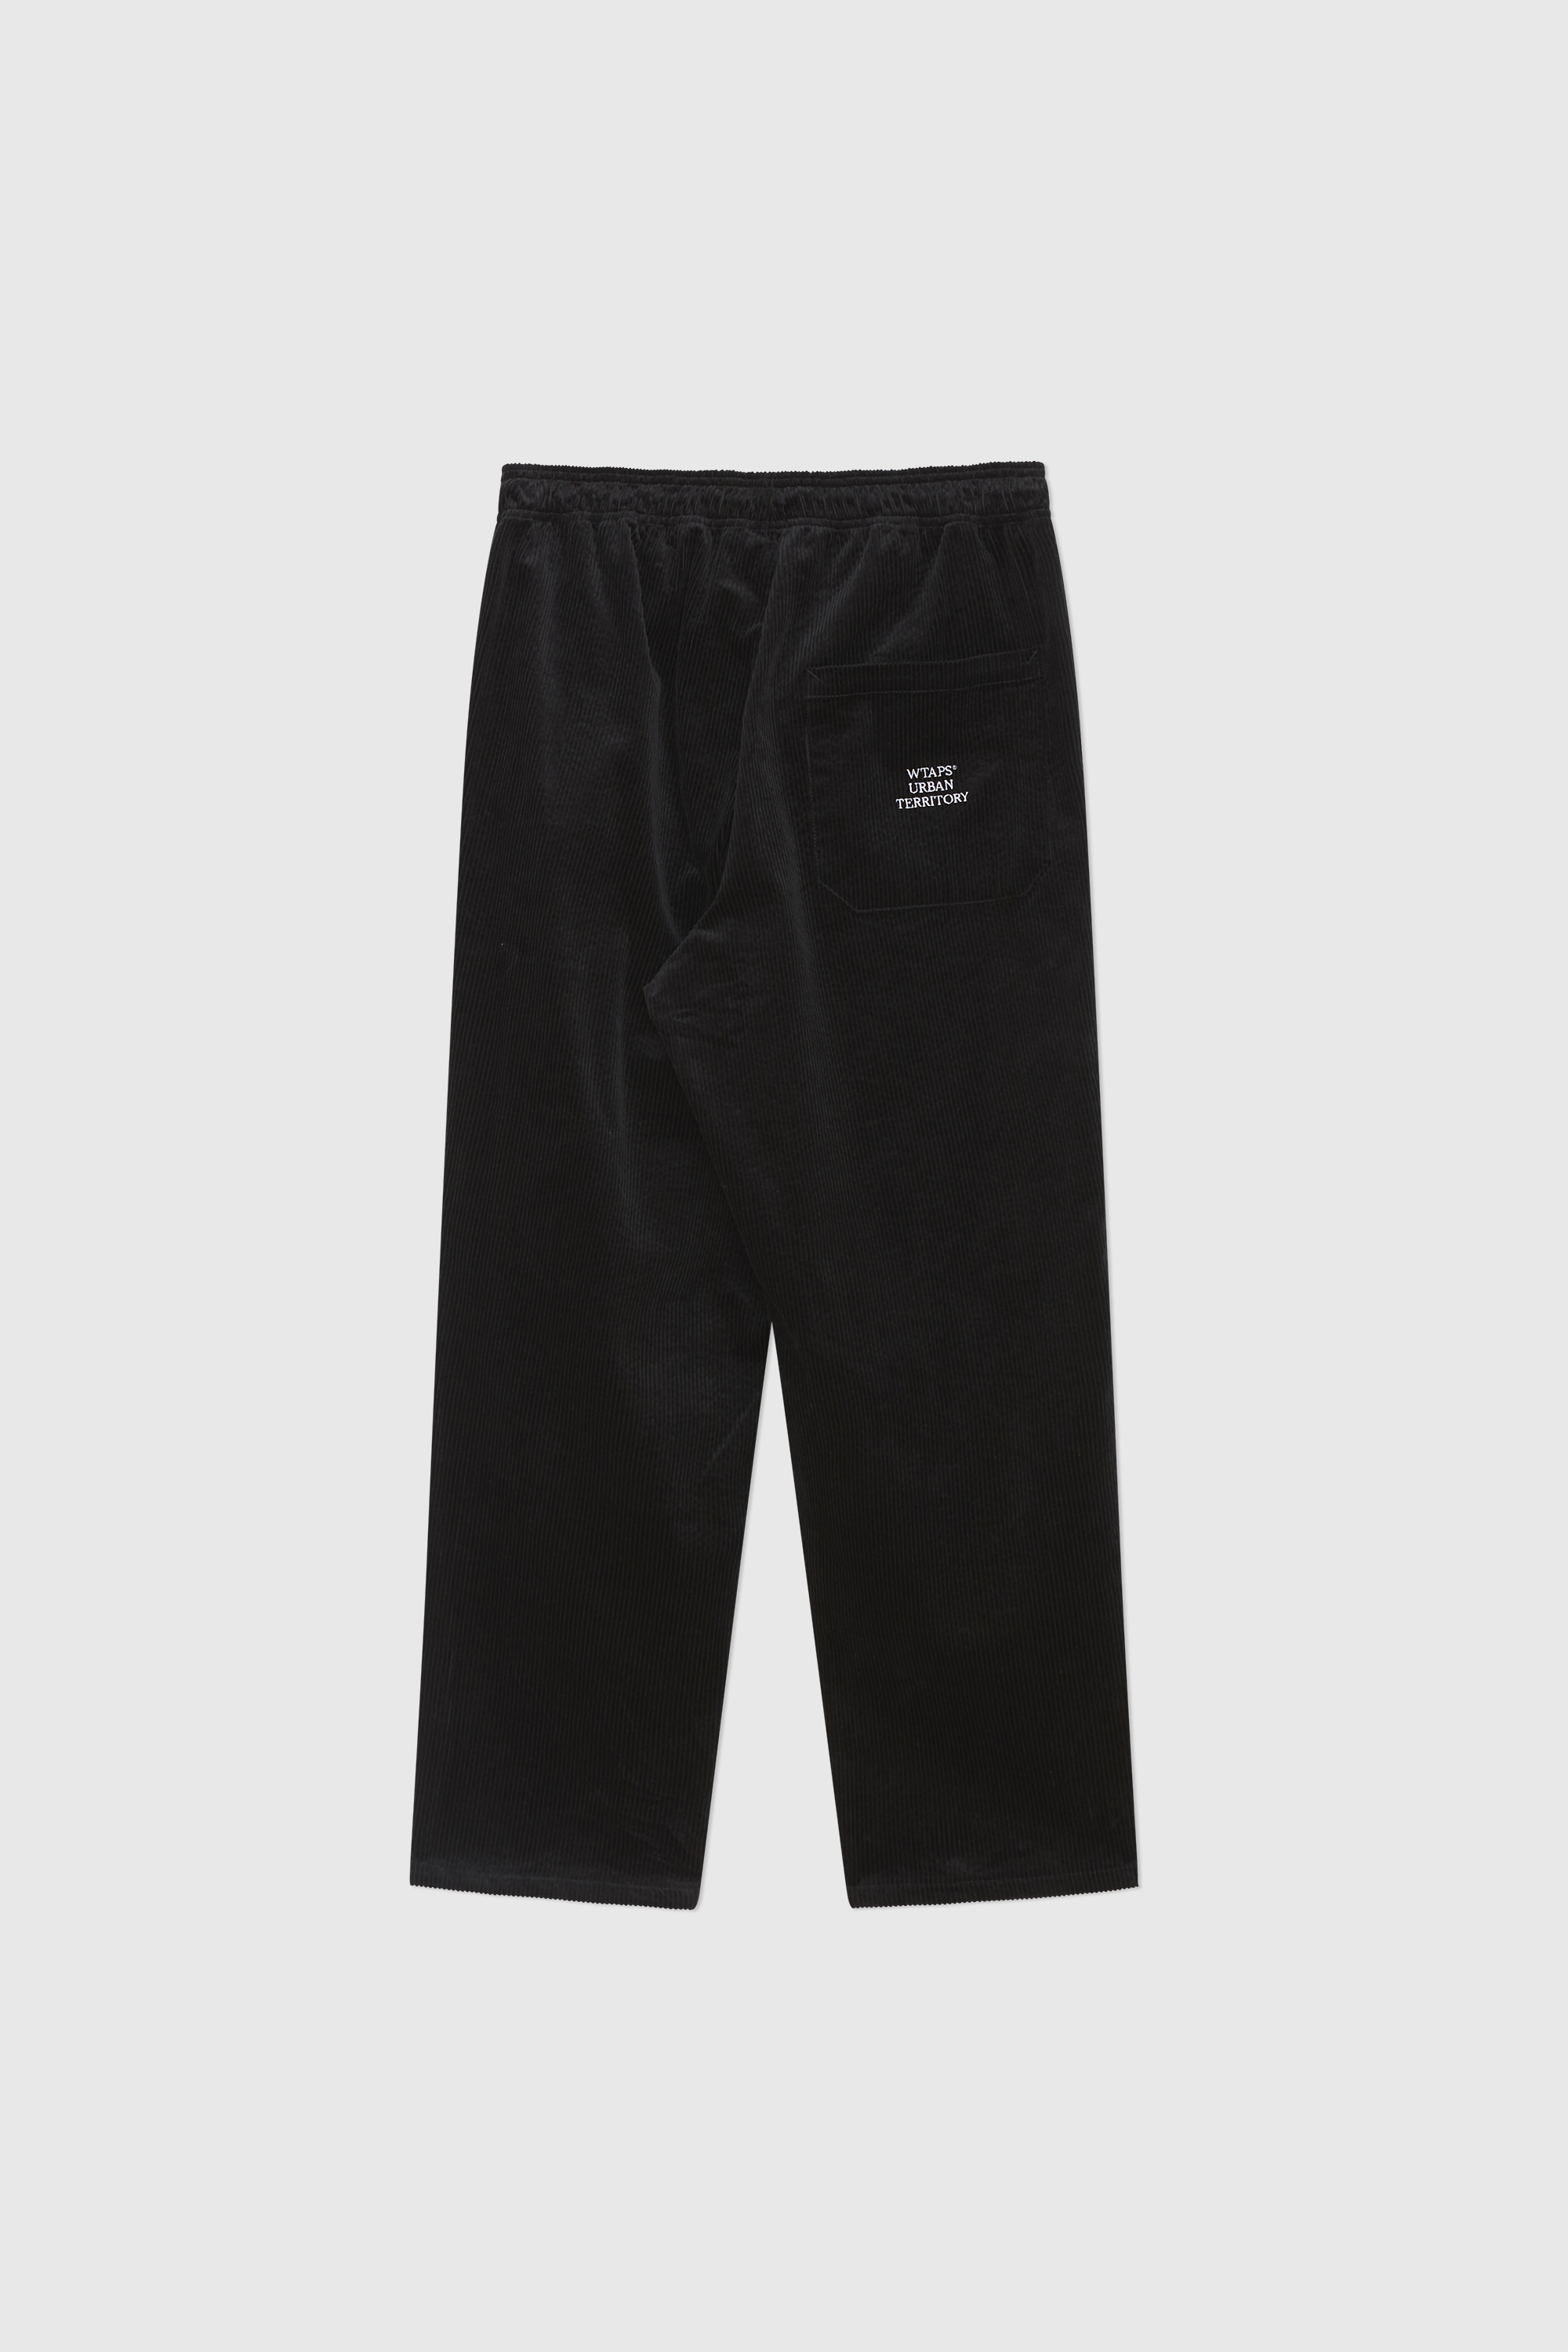 SEAGULL 04 / TROUSERS